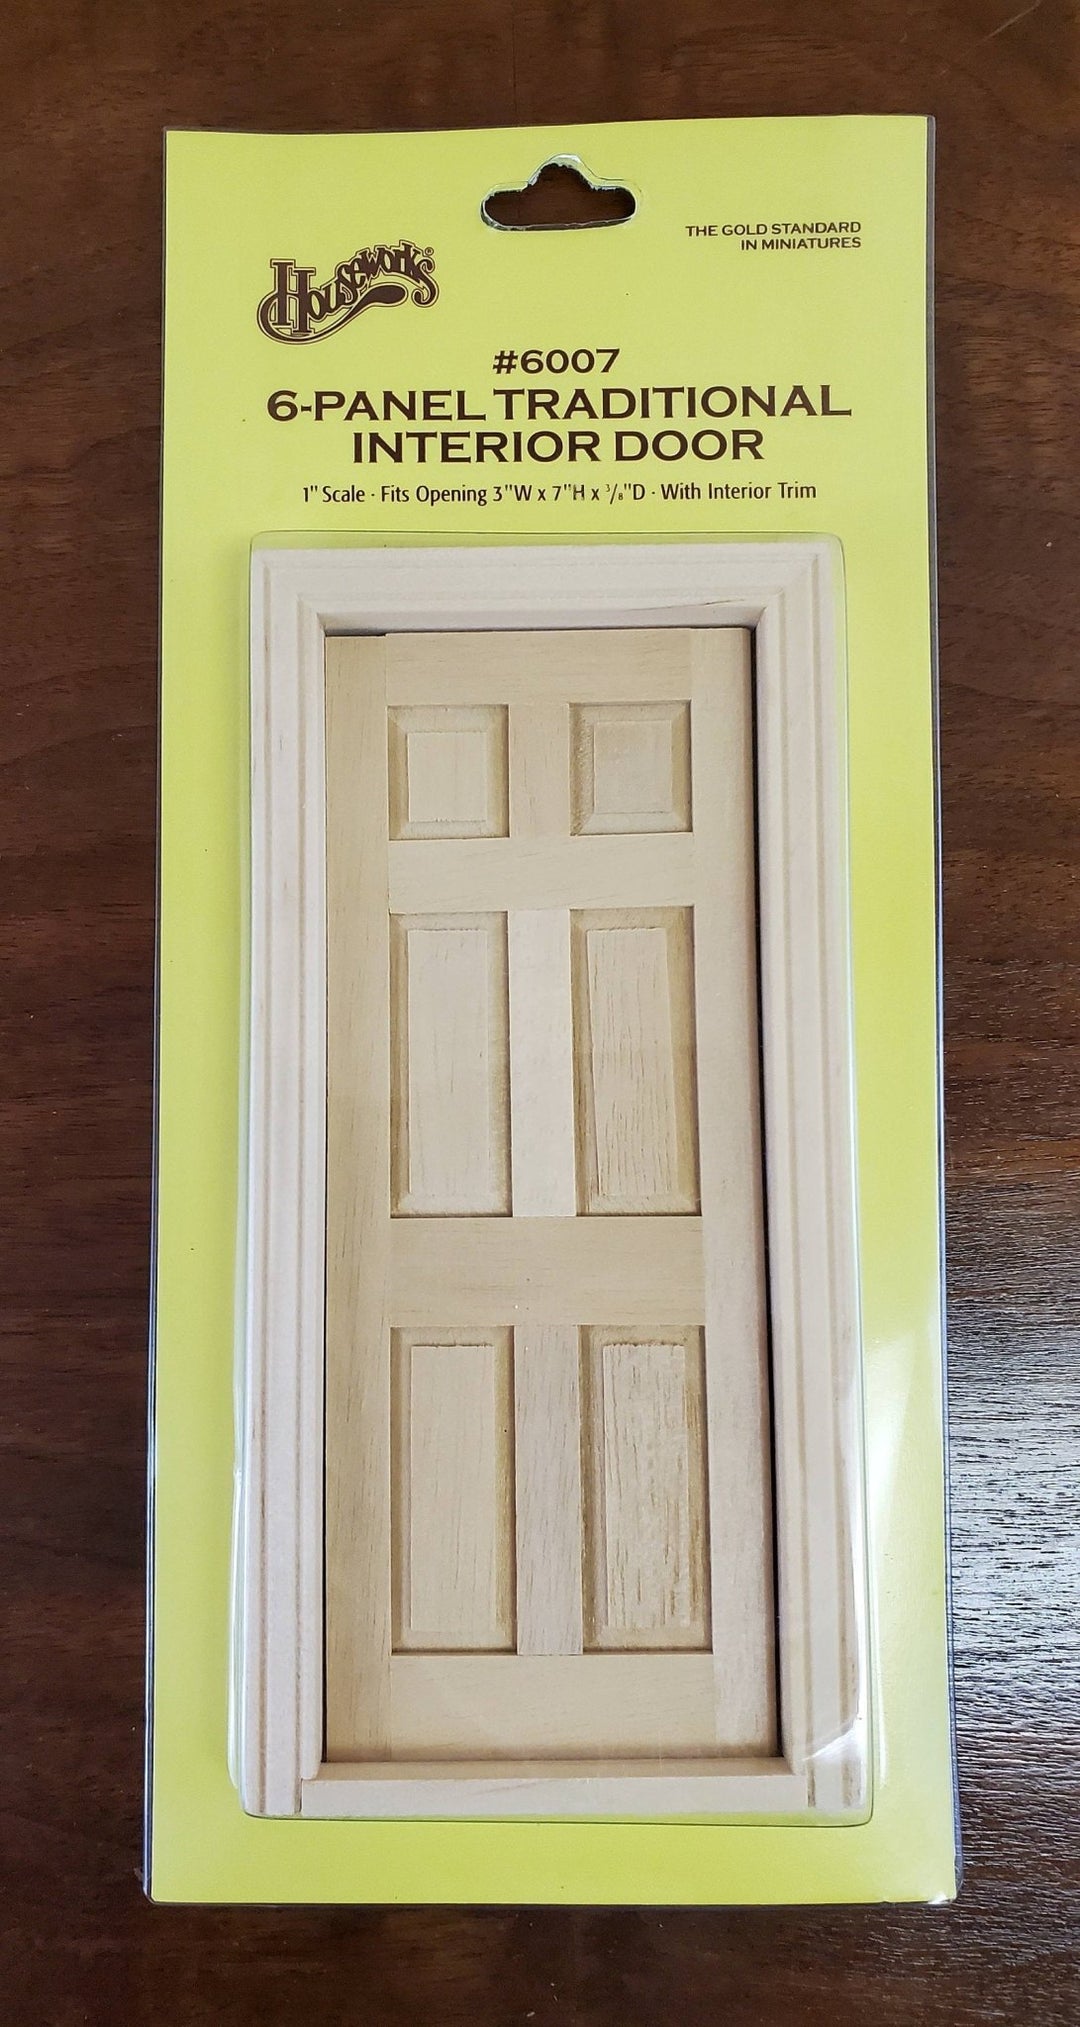 Dollhouse Miniature Door 6 Panel Traditional Interior 1:12 Scale by Houseworks #6007 - Miniature Crush